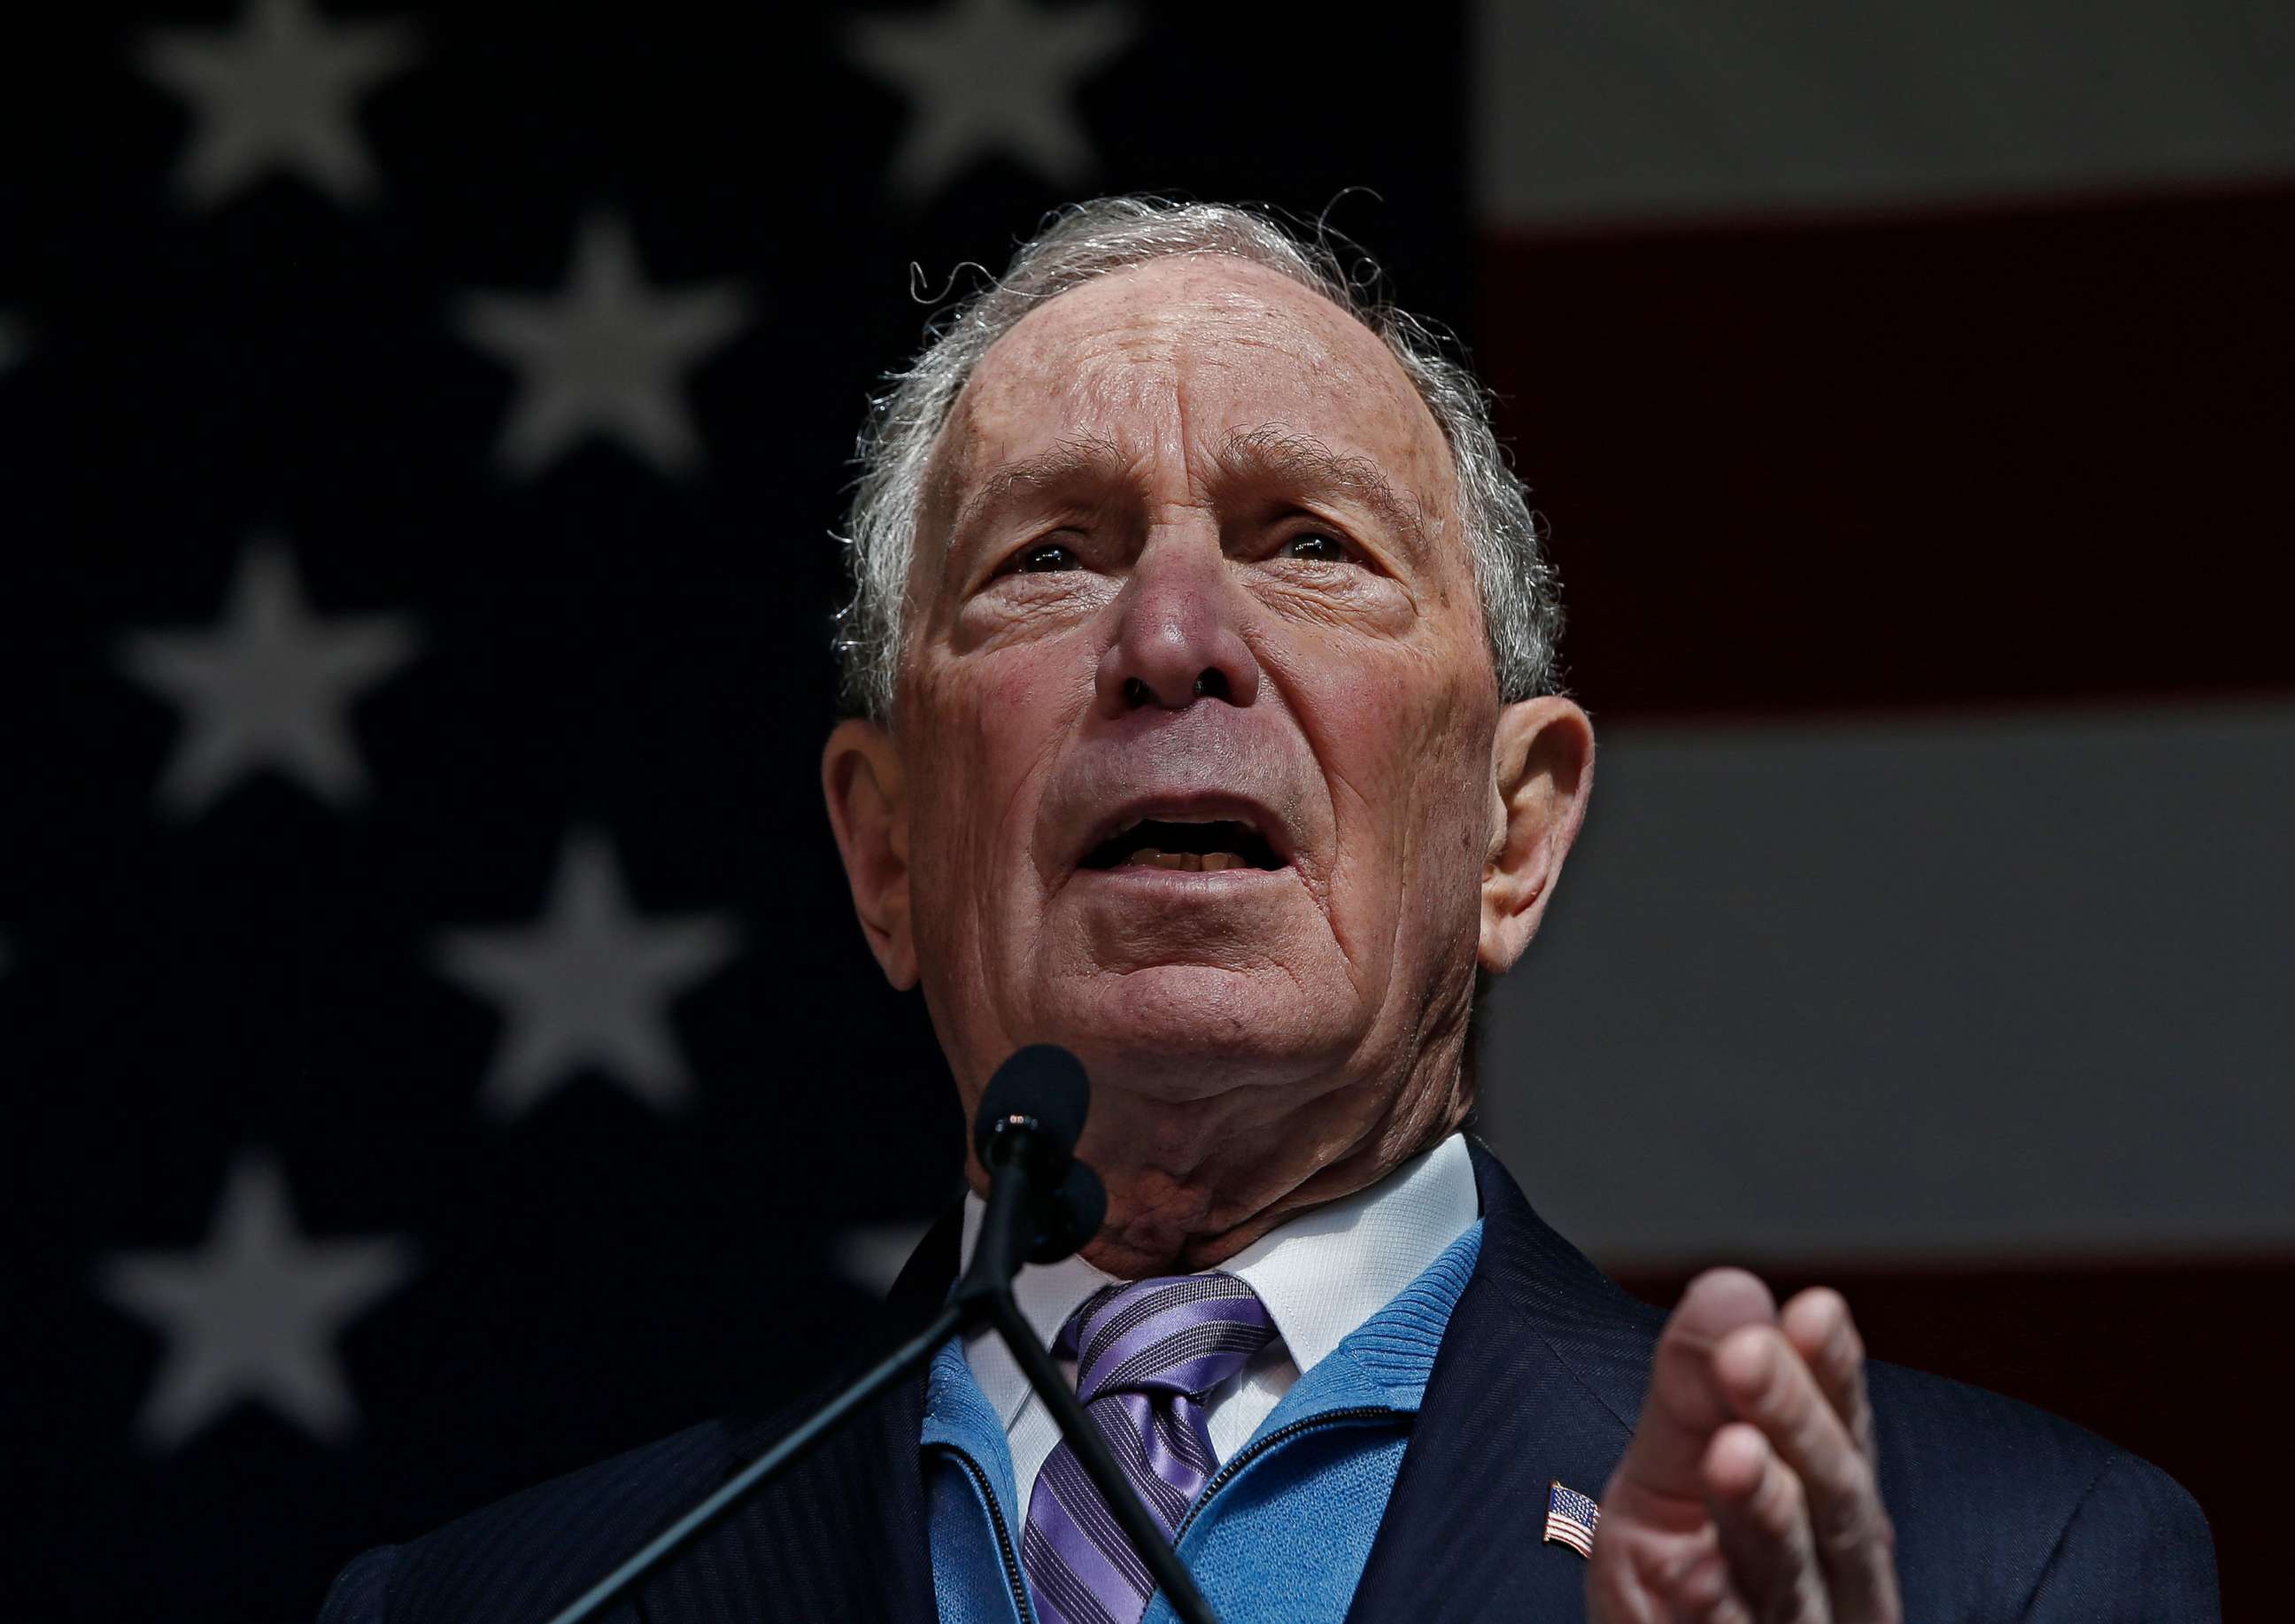 PHOTO: Democratic presidential candidate and former mayor of New York City Michael Bloomberg speaks at a rally in Houston, Feb. 26, 2020.